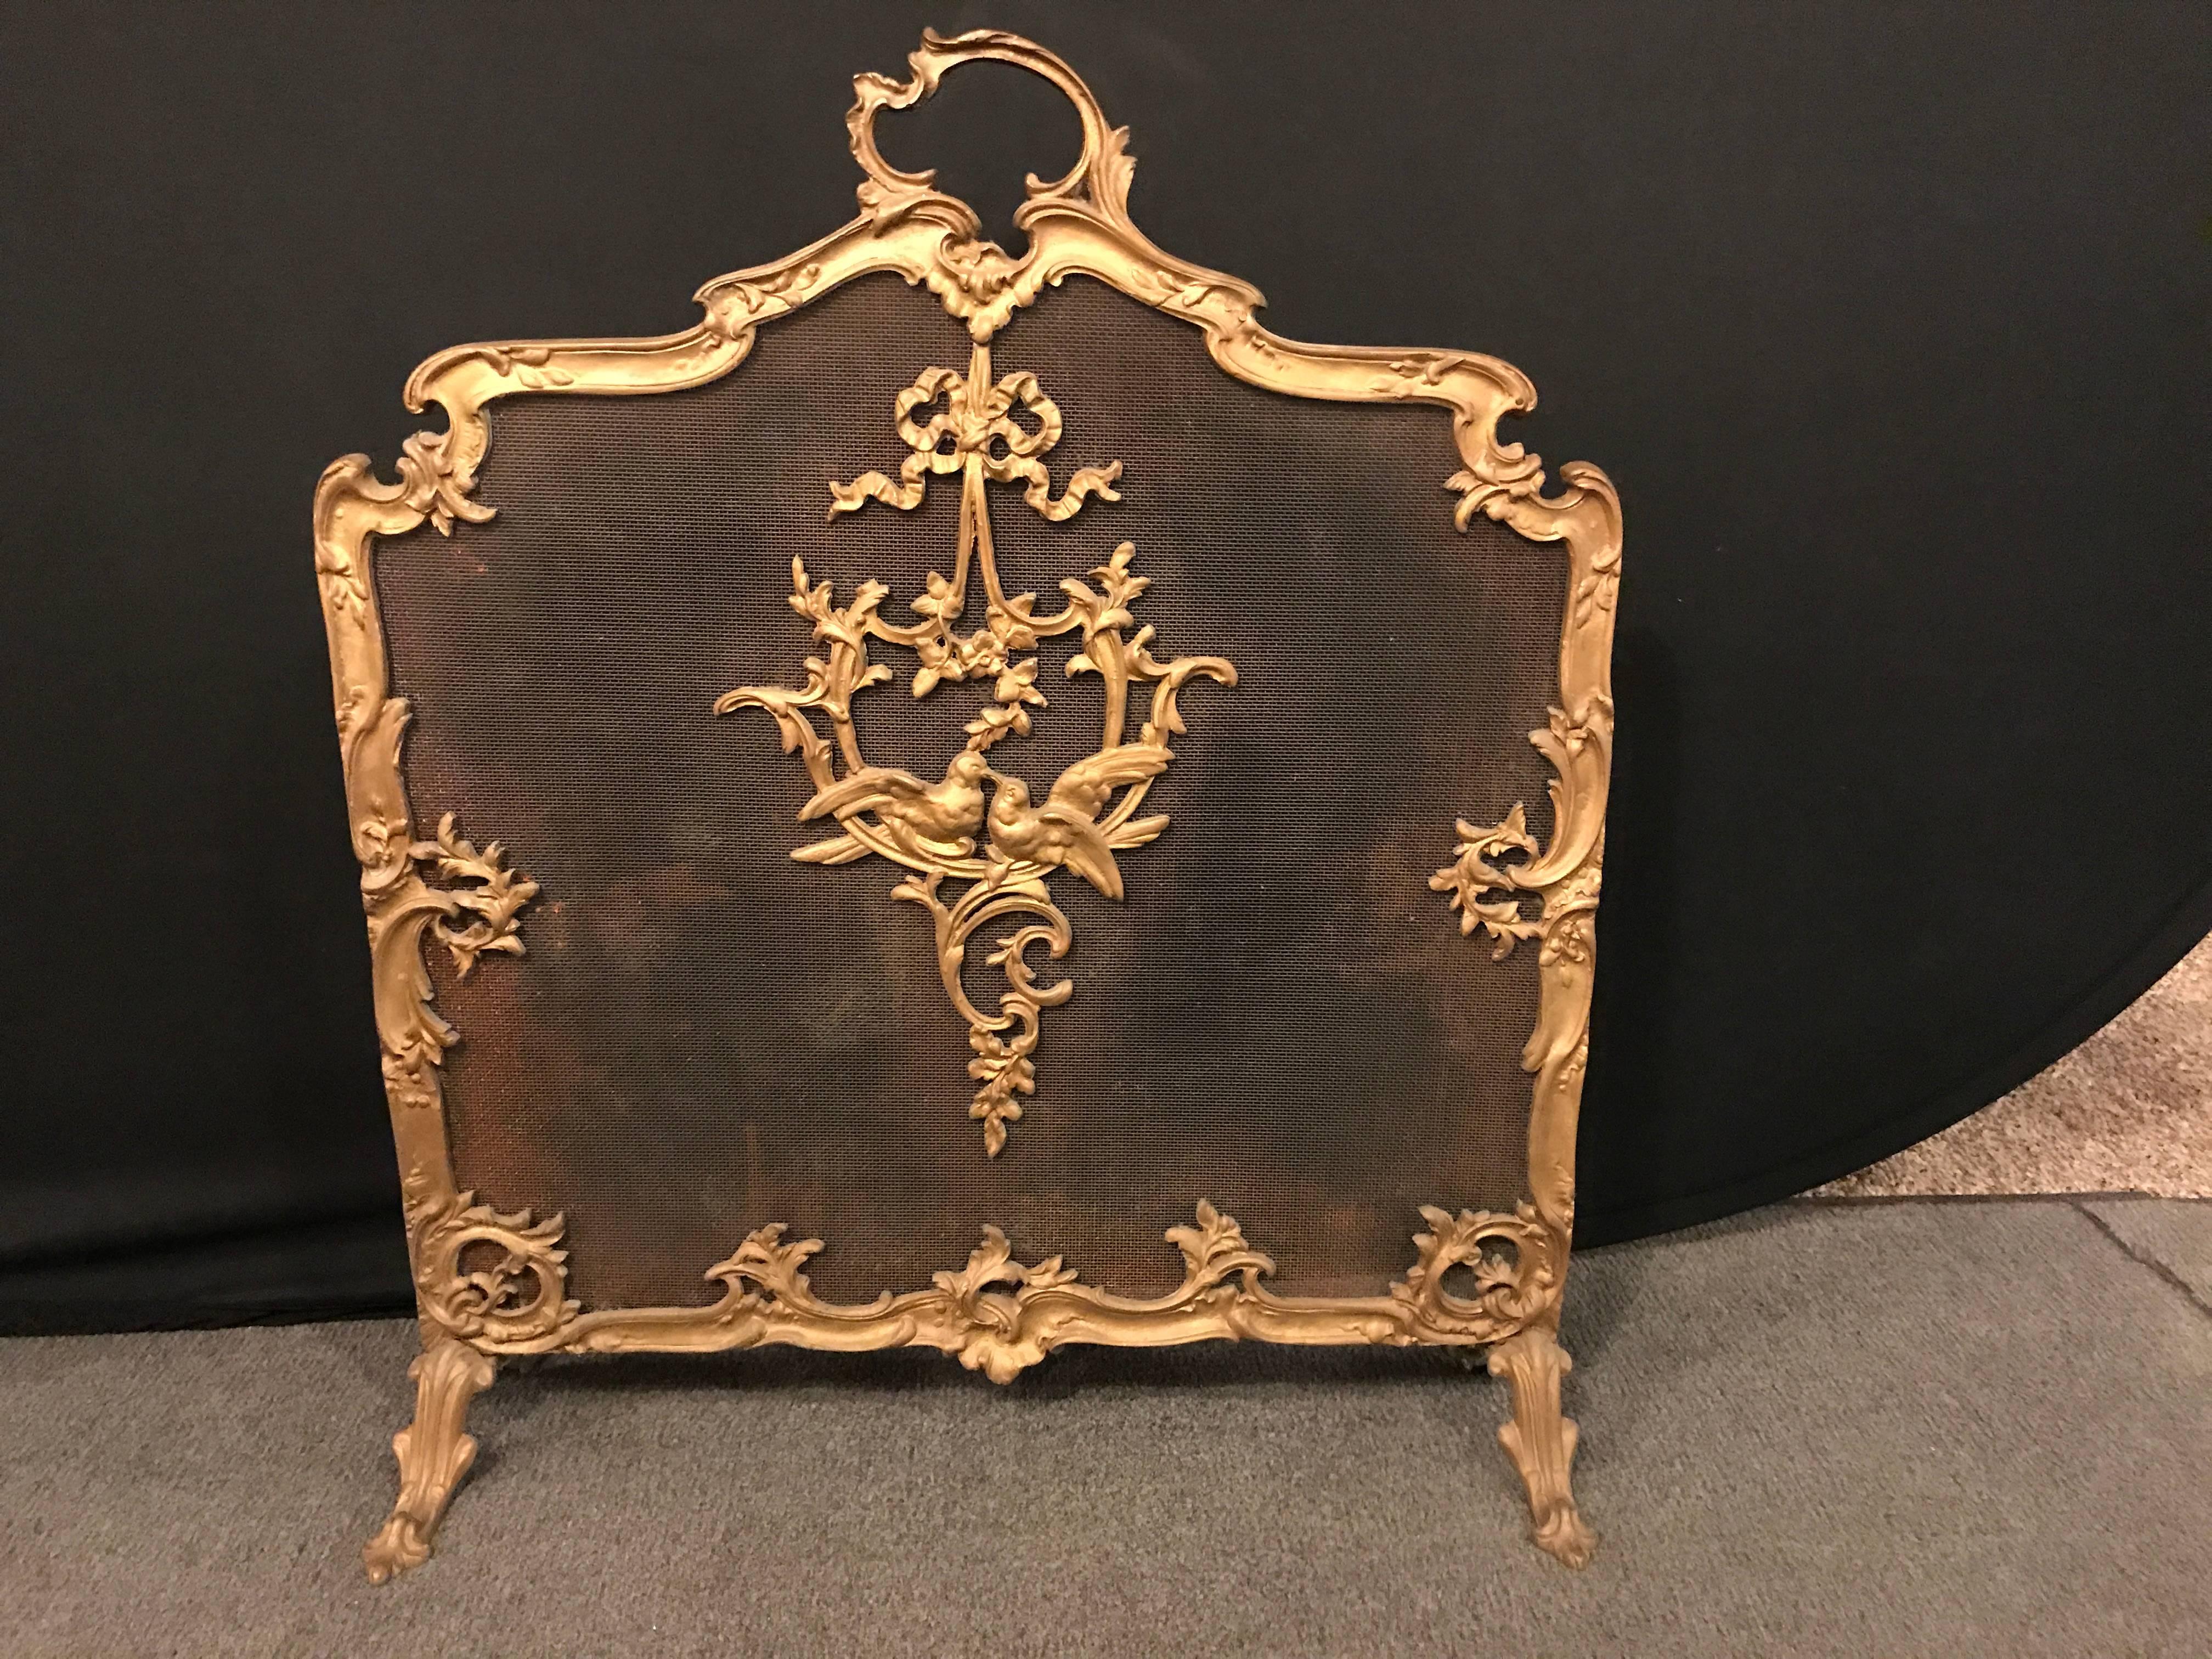 A Louis XV style French bronze fire screen. Sitting on claw feet is this bronze framed fire screen in the Louis XV manner. The center depicting a pair of love birds under a bow and wreath. Finely cast in a doré bronze re-gilded finish. lXAX.